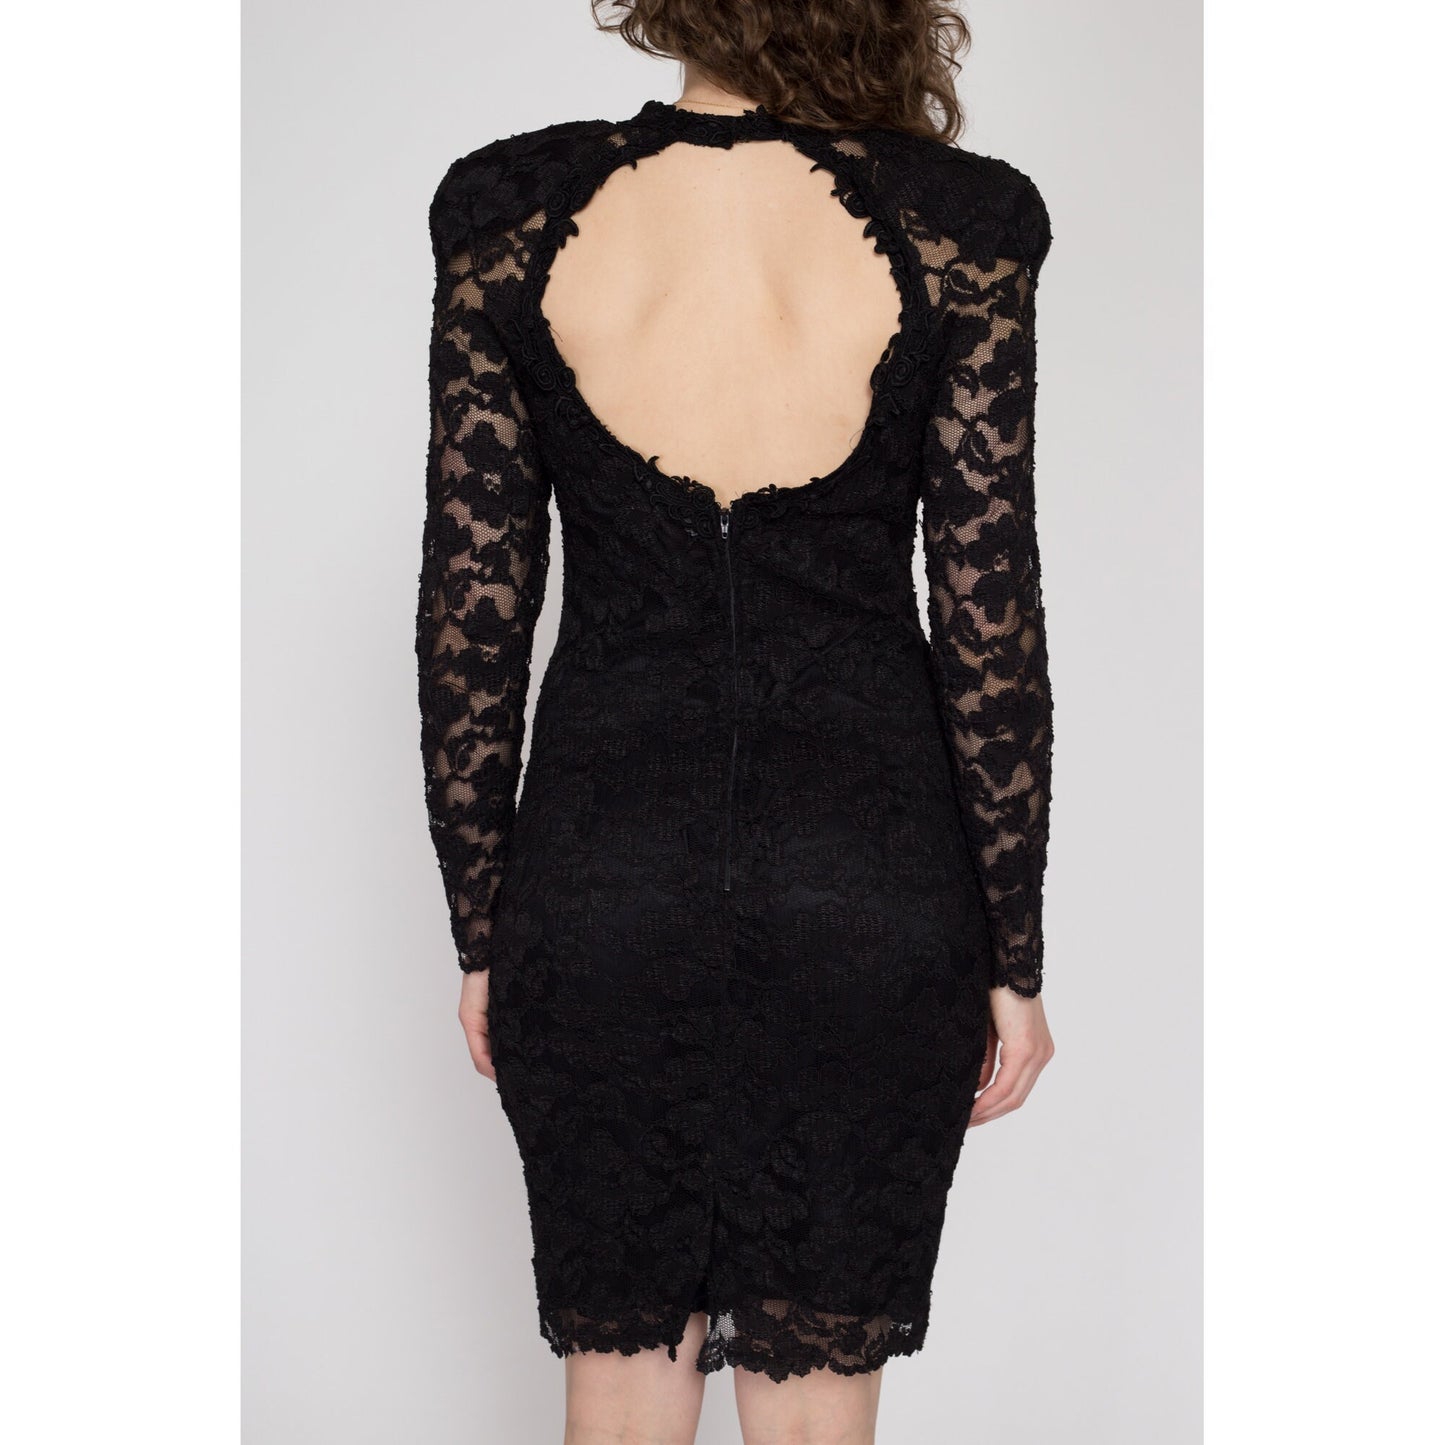 Medium 80s Black Lace Choker Party Dress | Vintage Keyhole Back Sexy Fitted Mini Cocktail Dress